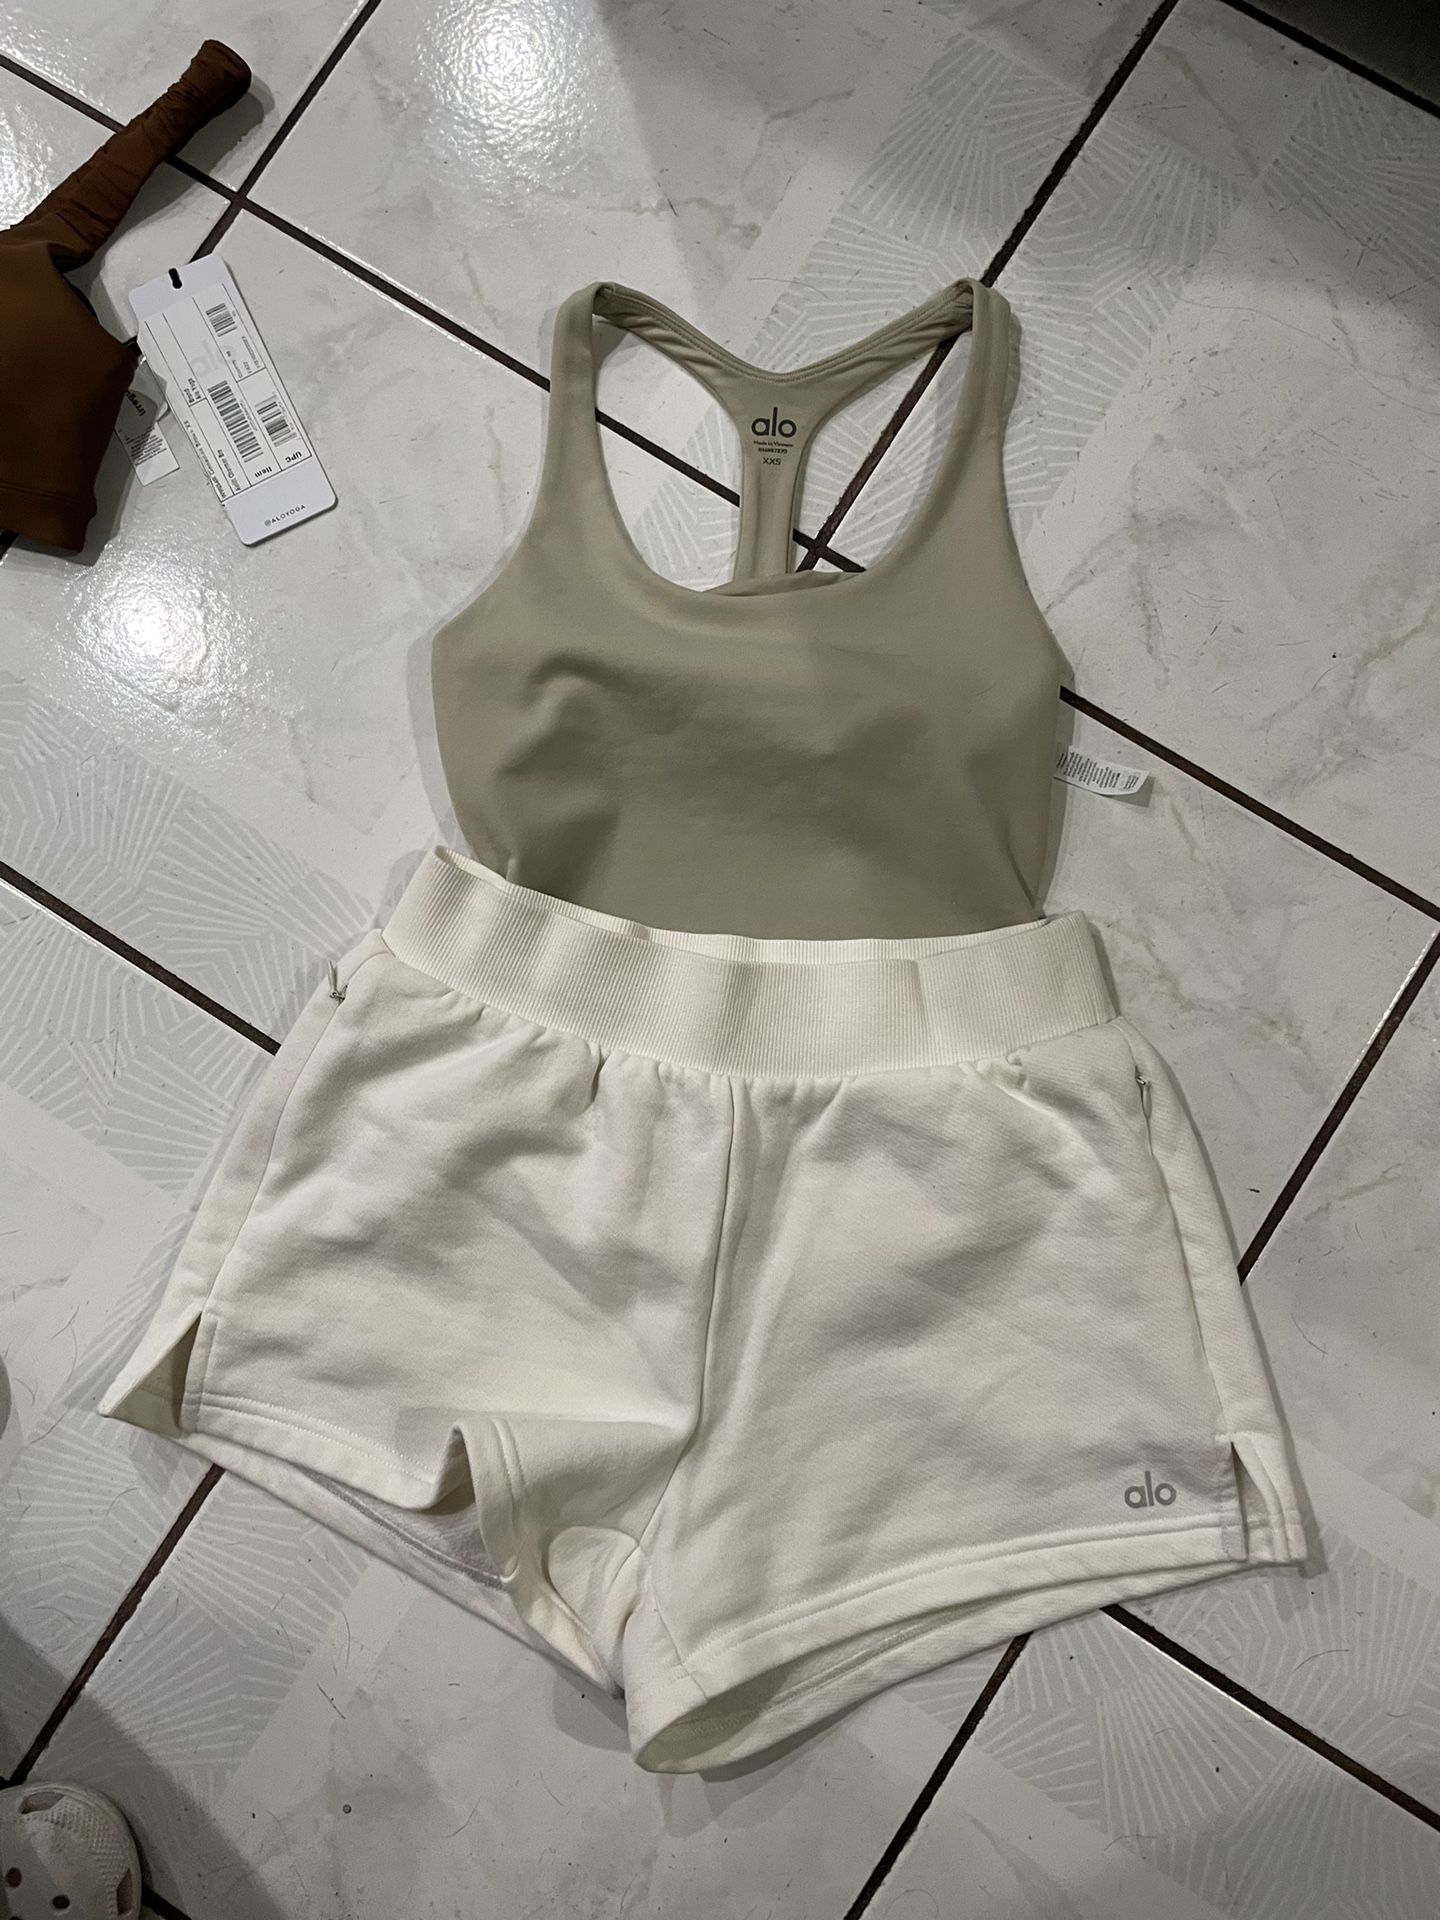 Alo Body Suit + Shorts Small